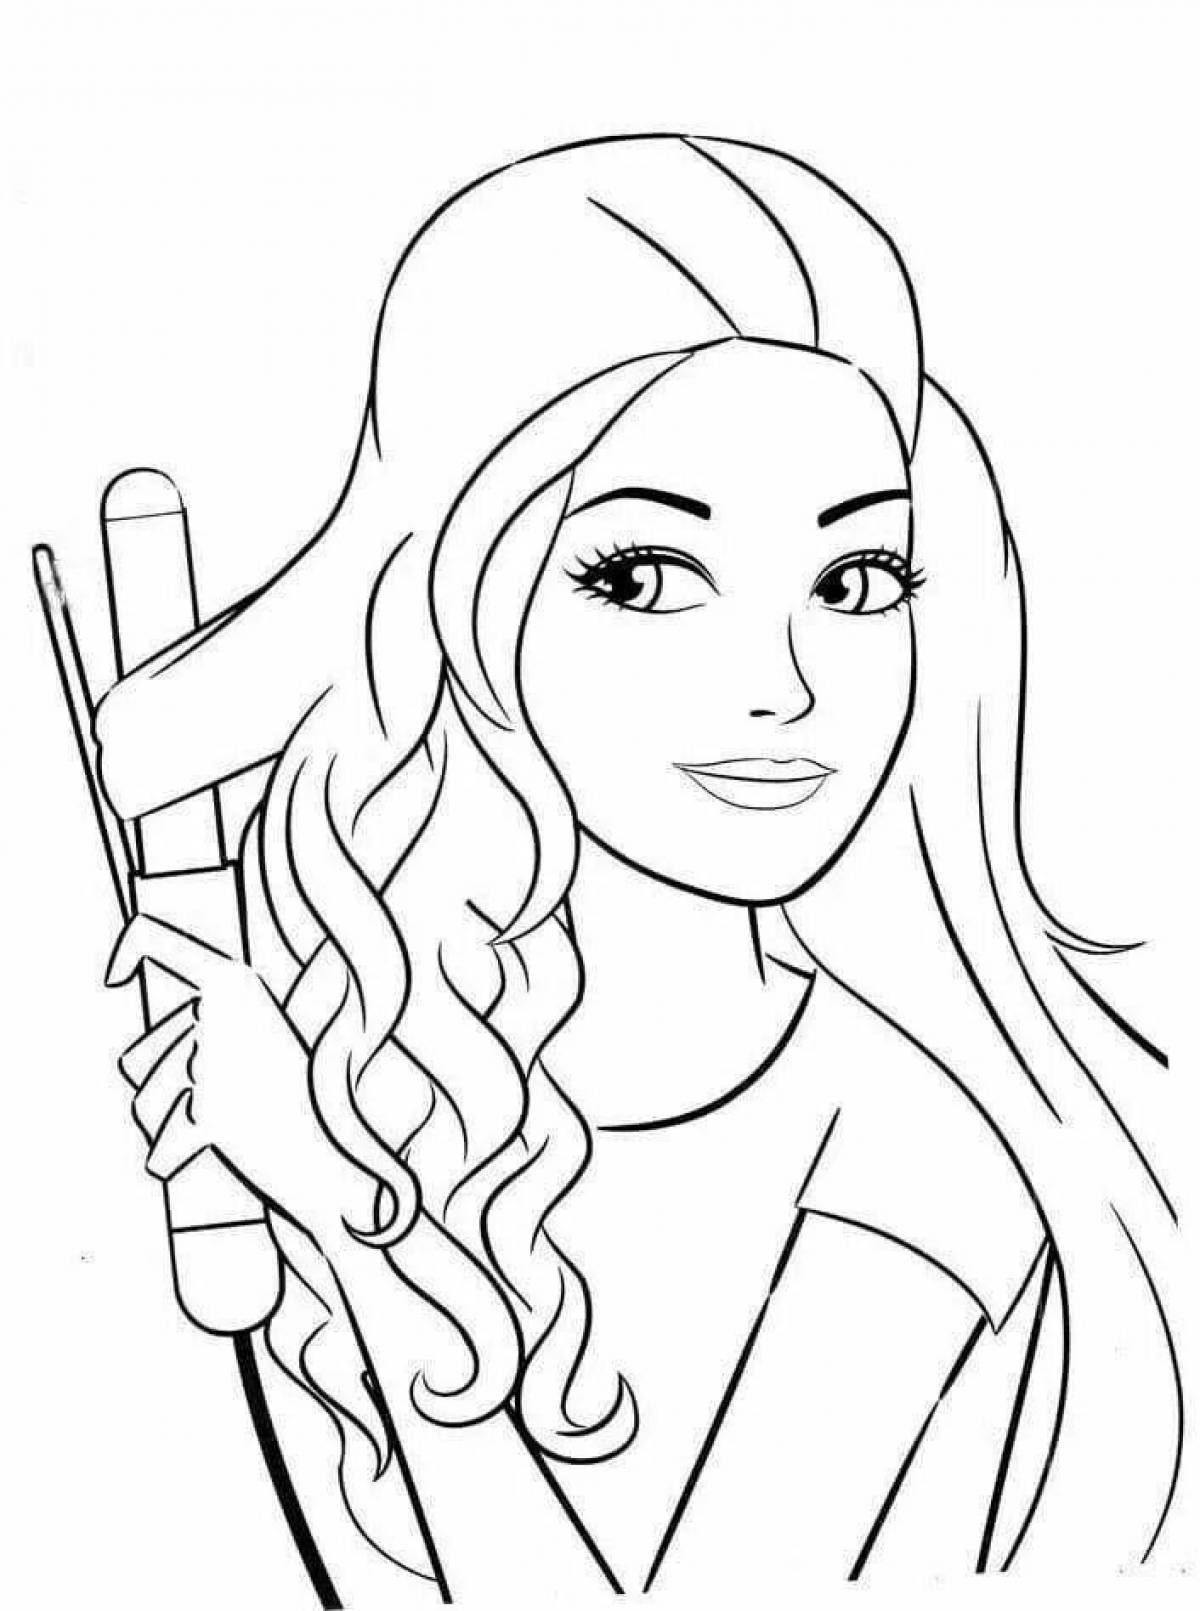 Bright barbie face coloring page